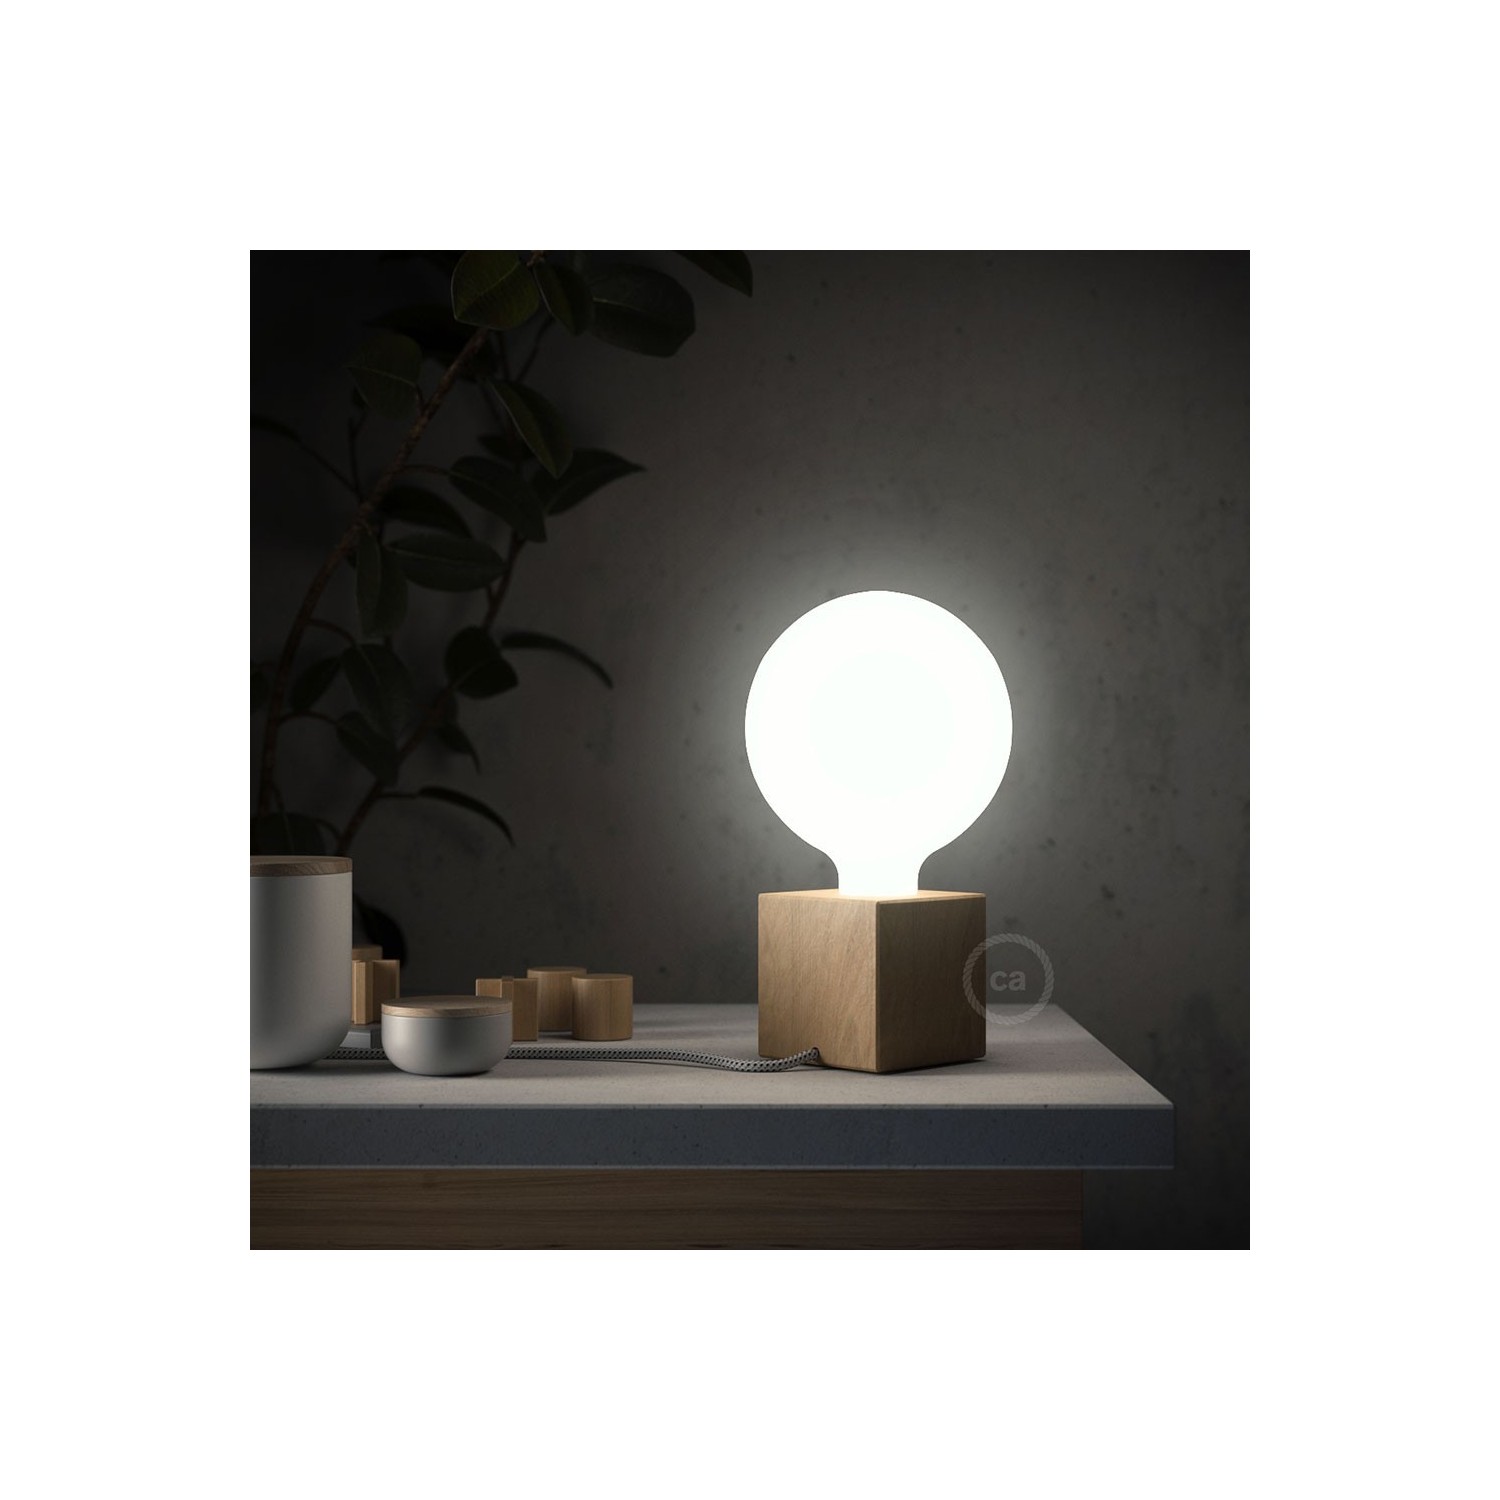 Posaluce Cubetto, the natural wood table lamp, with textile cable, in-line switch and english plug